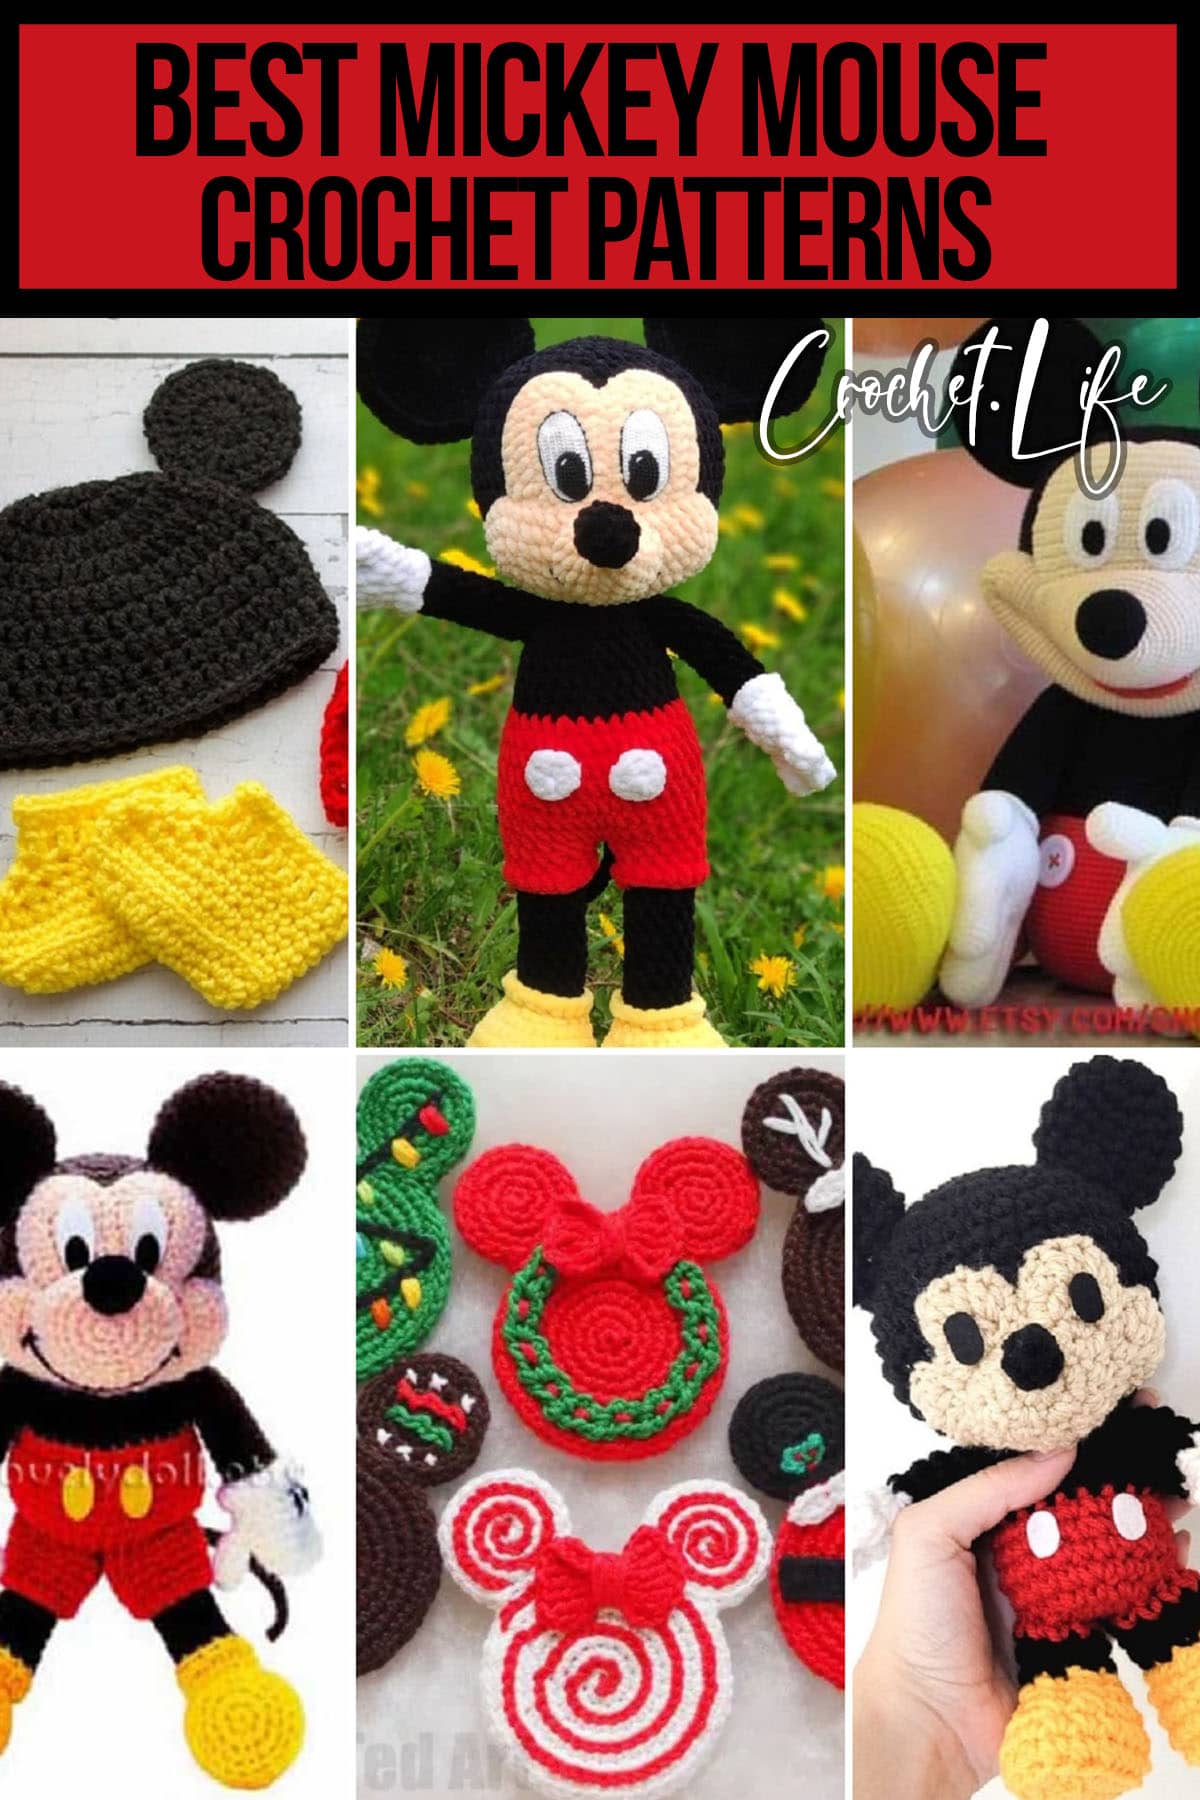 photo collage of crochet mickey mouse patterns with text which reads best mickey mouse crochet patterns